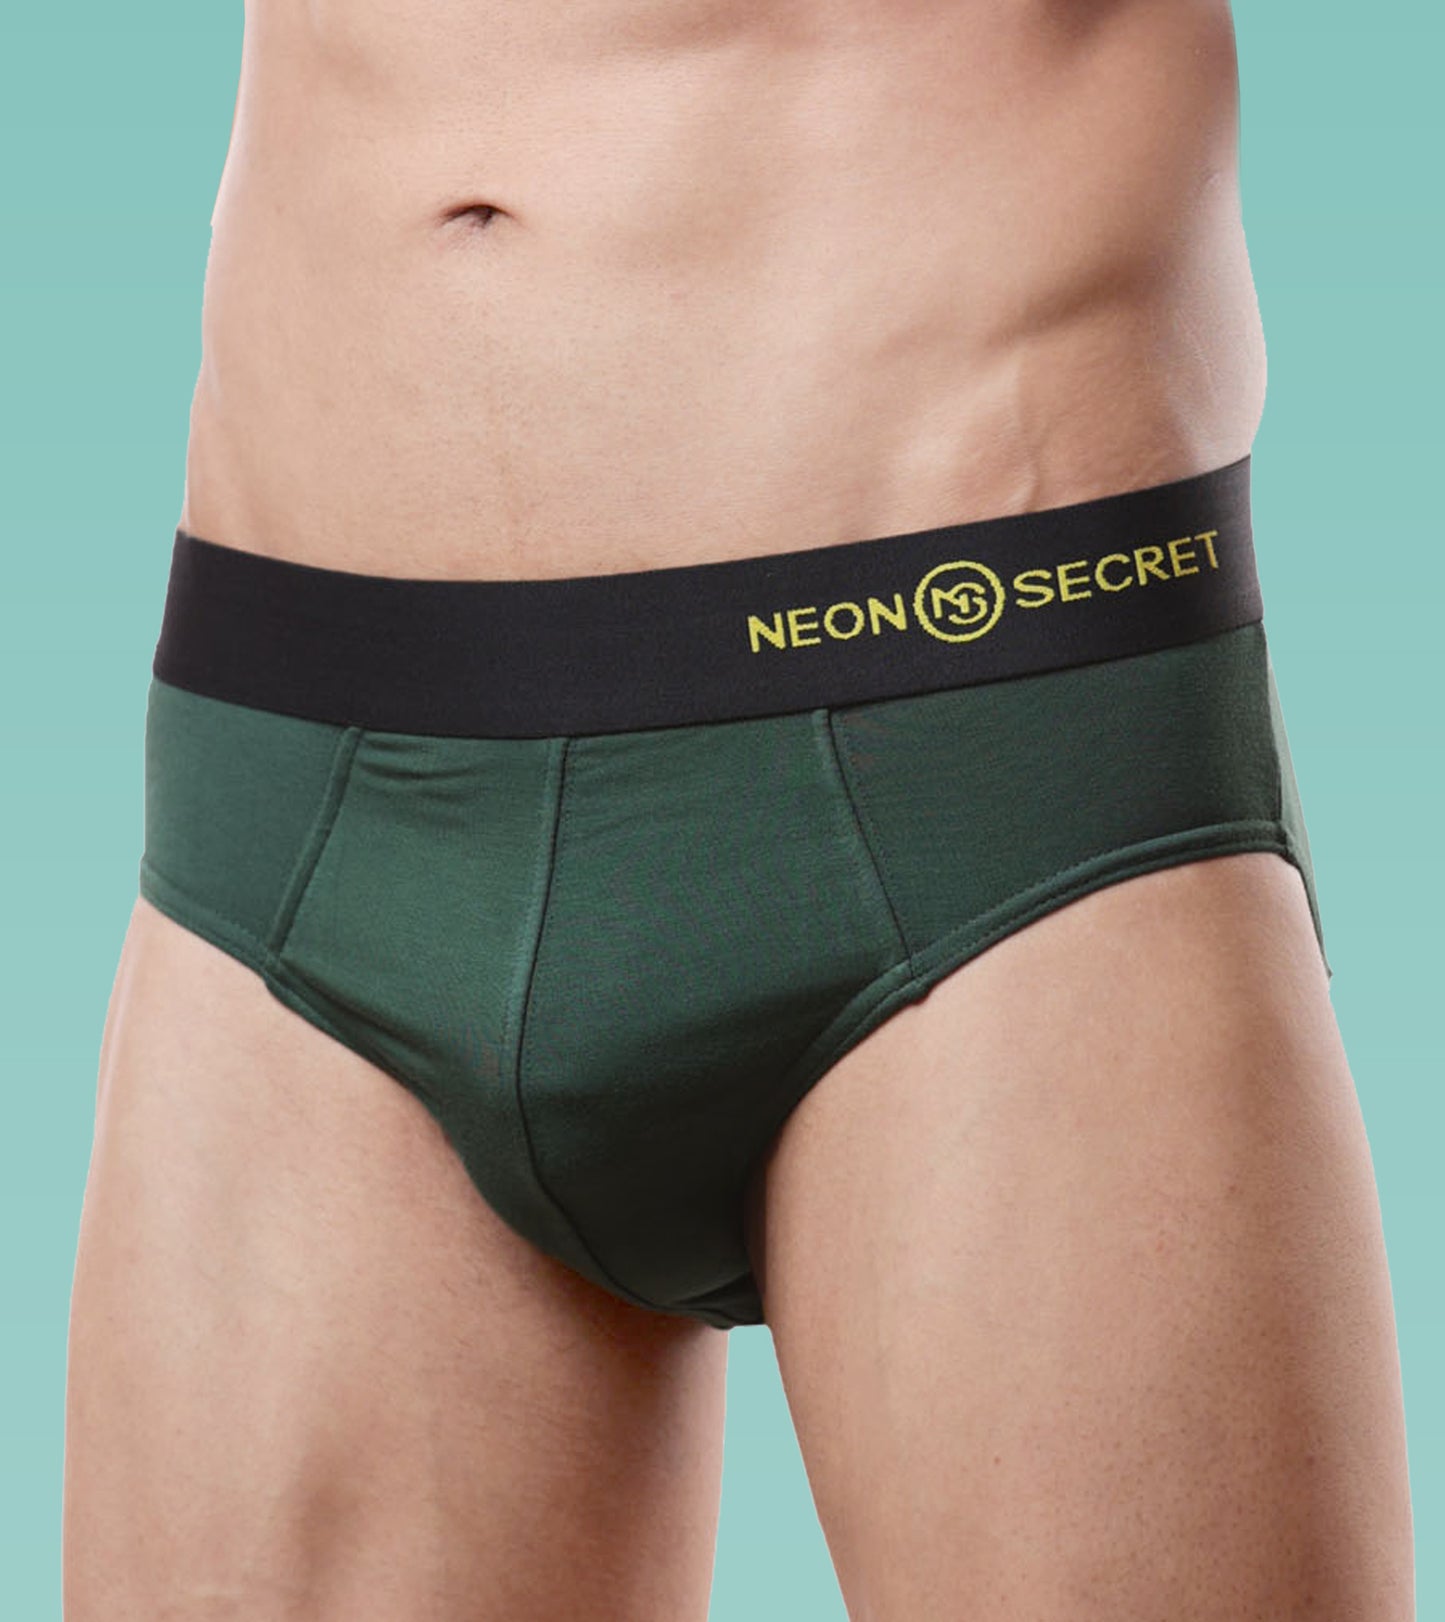 Men's Breathable Briefs- Pack of 3 (Sapphire Blue, Pine Green, Martini Blue)